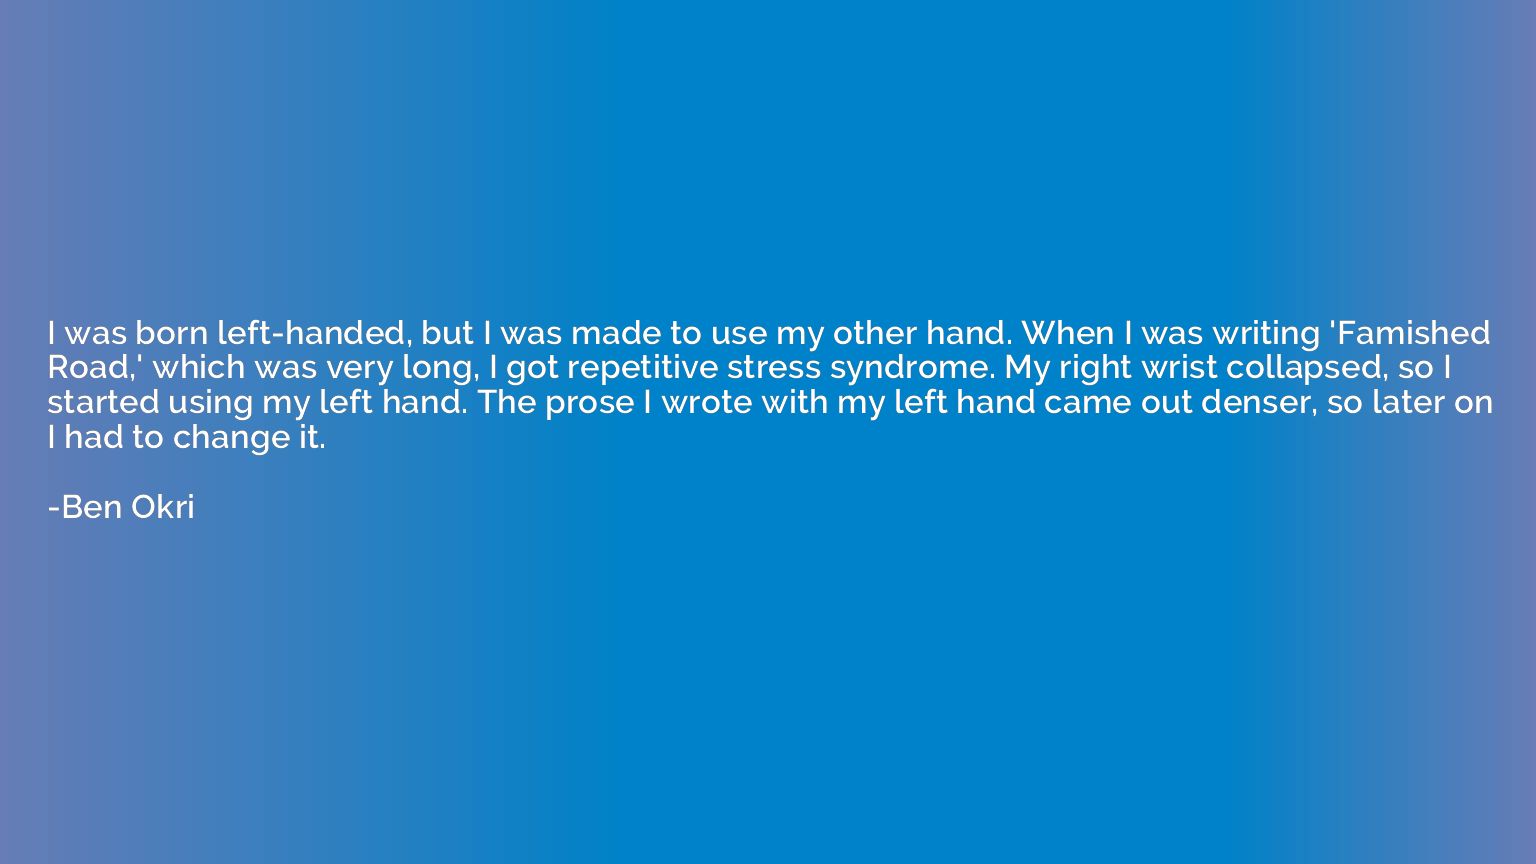 I was born left-handed, but I was made to use my other hand.